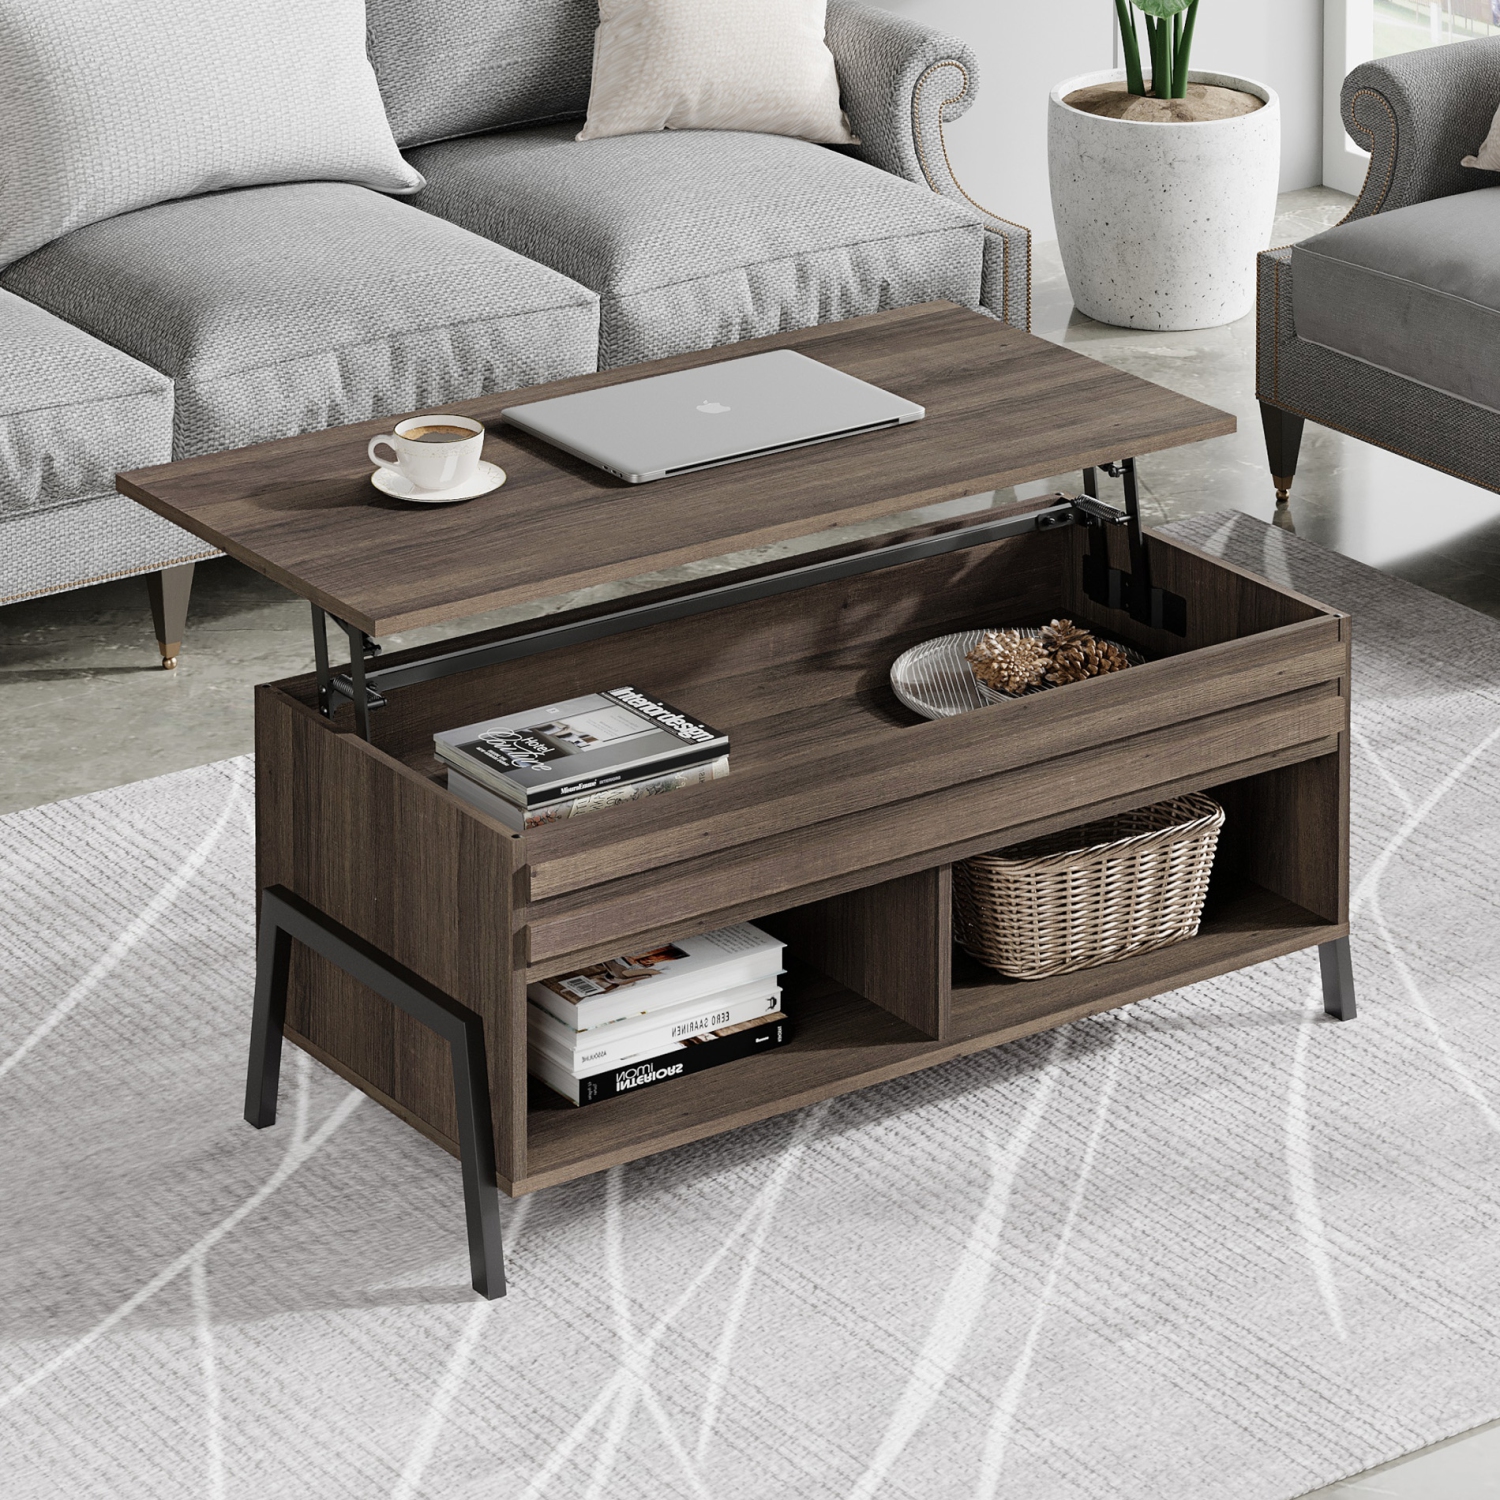 WAMPAT Lift Top Coffee Table, Modern Table with Hidden Compartment and Storage Shelf for Living Room Reception Room